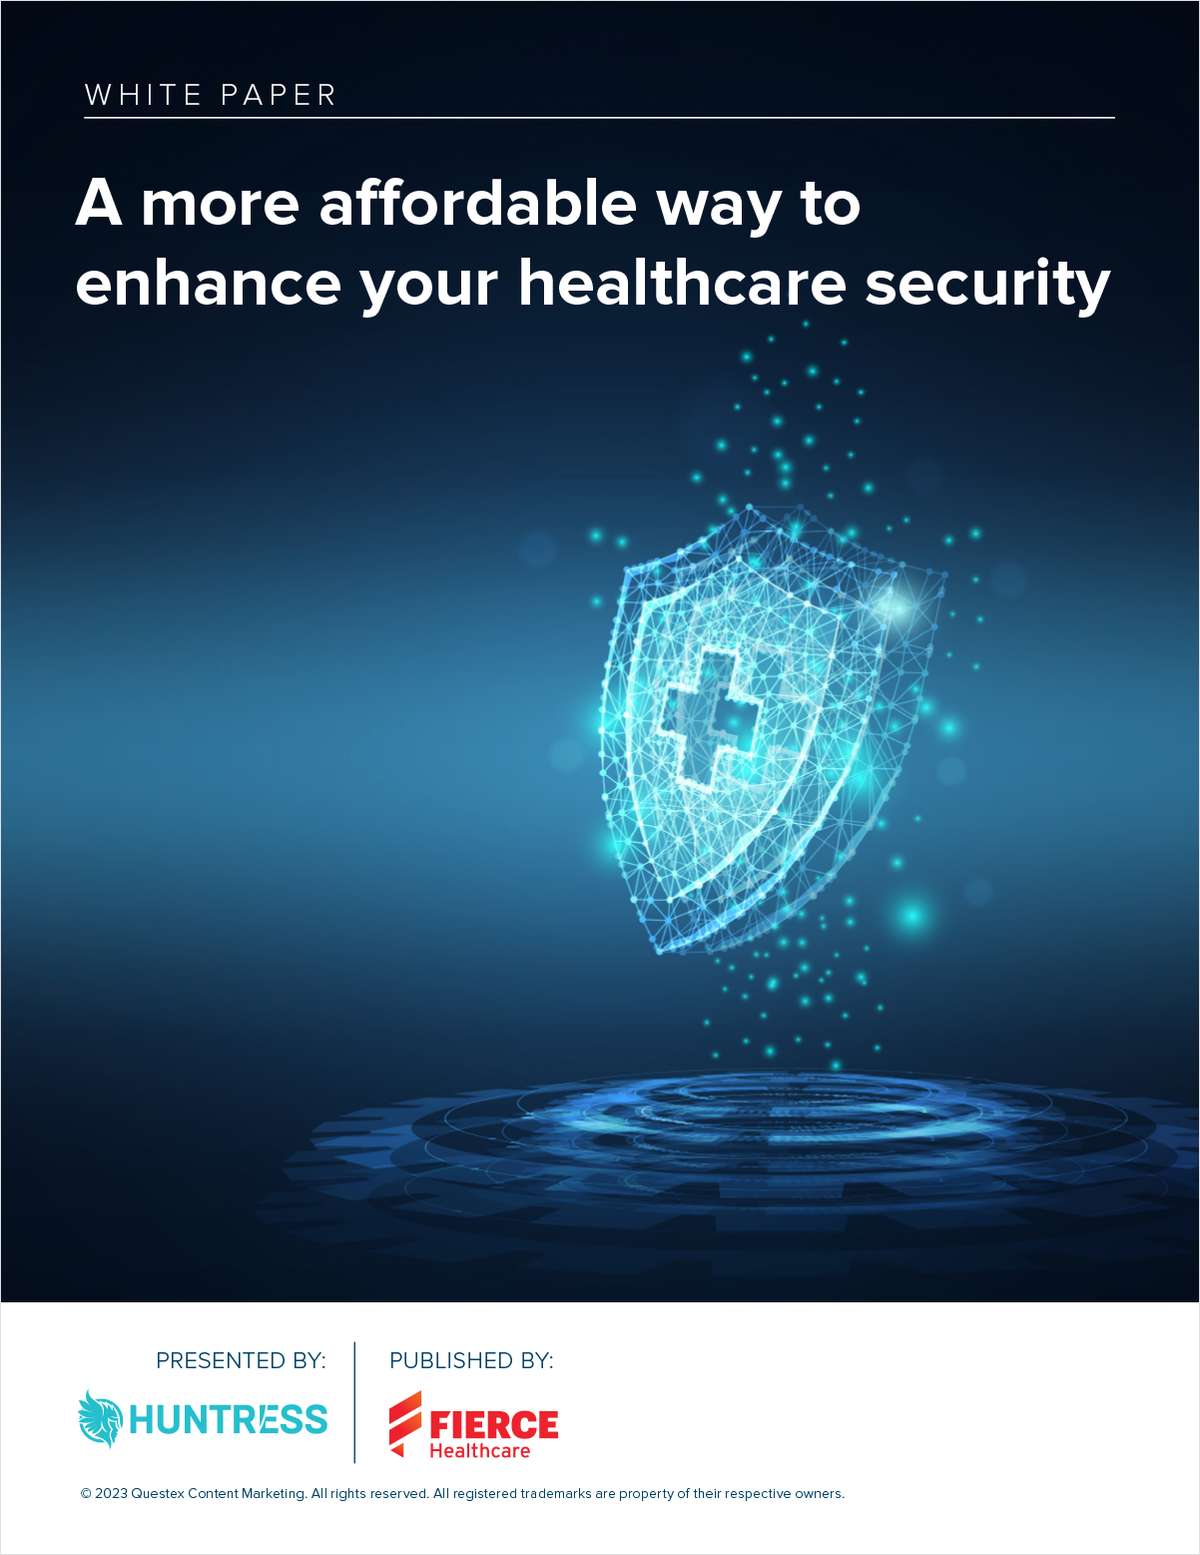 A More Affordable Way to Enhance Healthcare Security